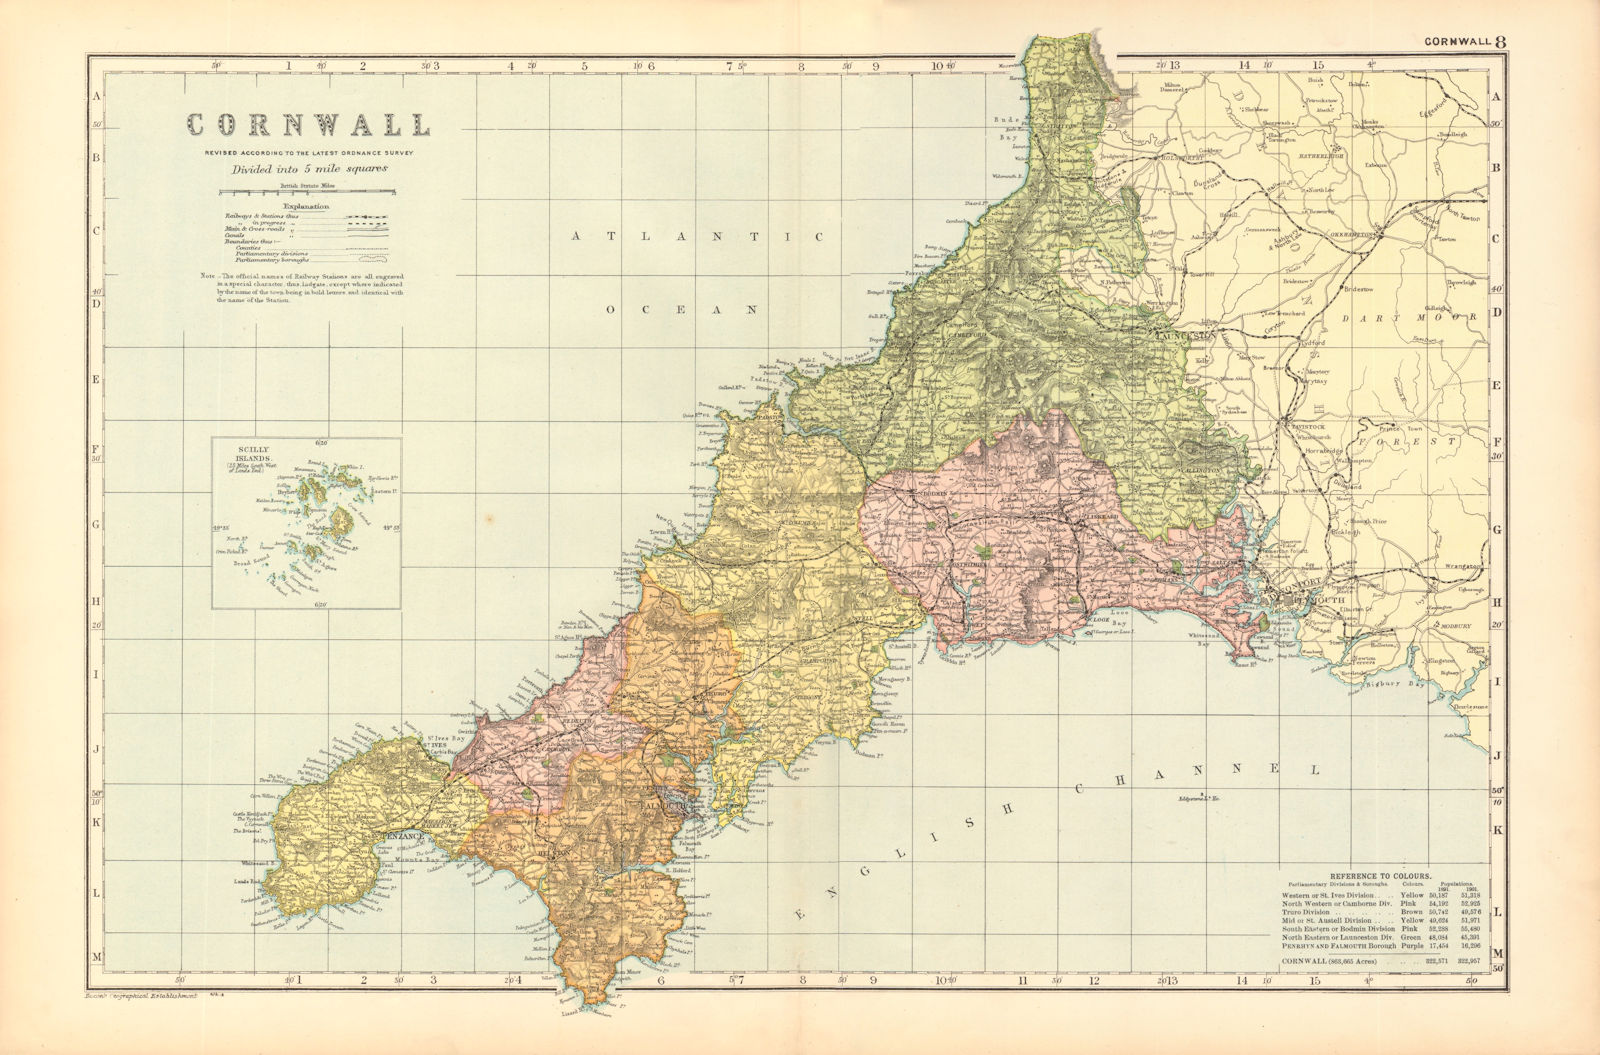 CORNWALL. Showing Parliamentary divisions, boroughs & parks. BACON 1904 map